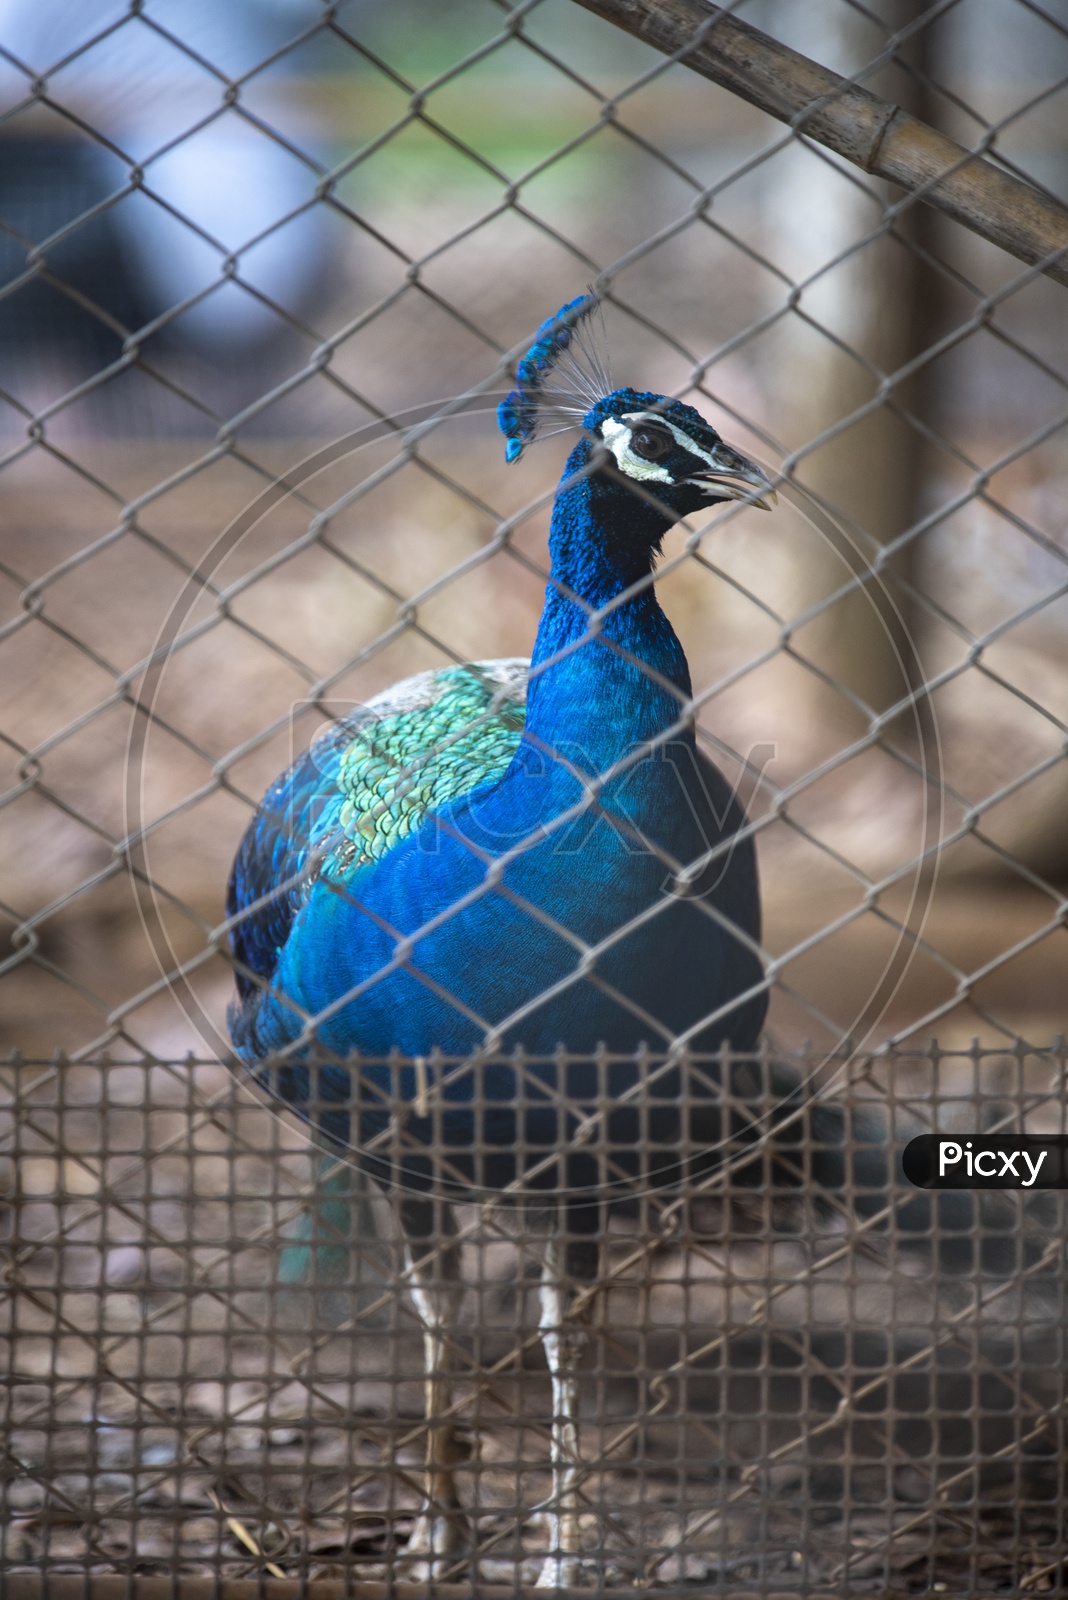 Peacock in a cage At Zoo